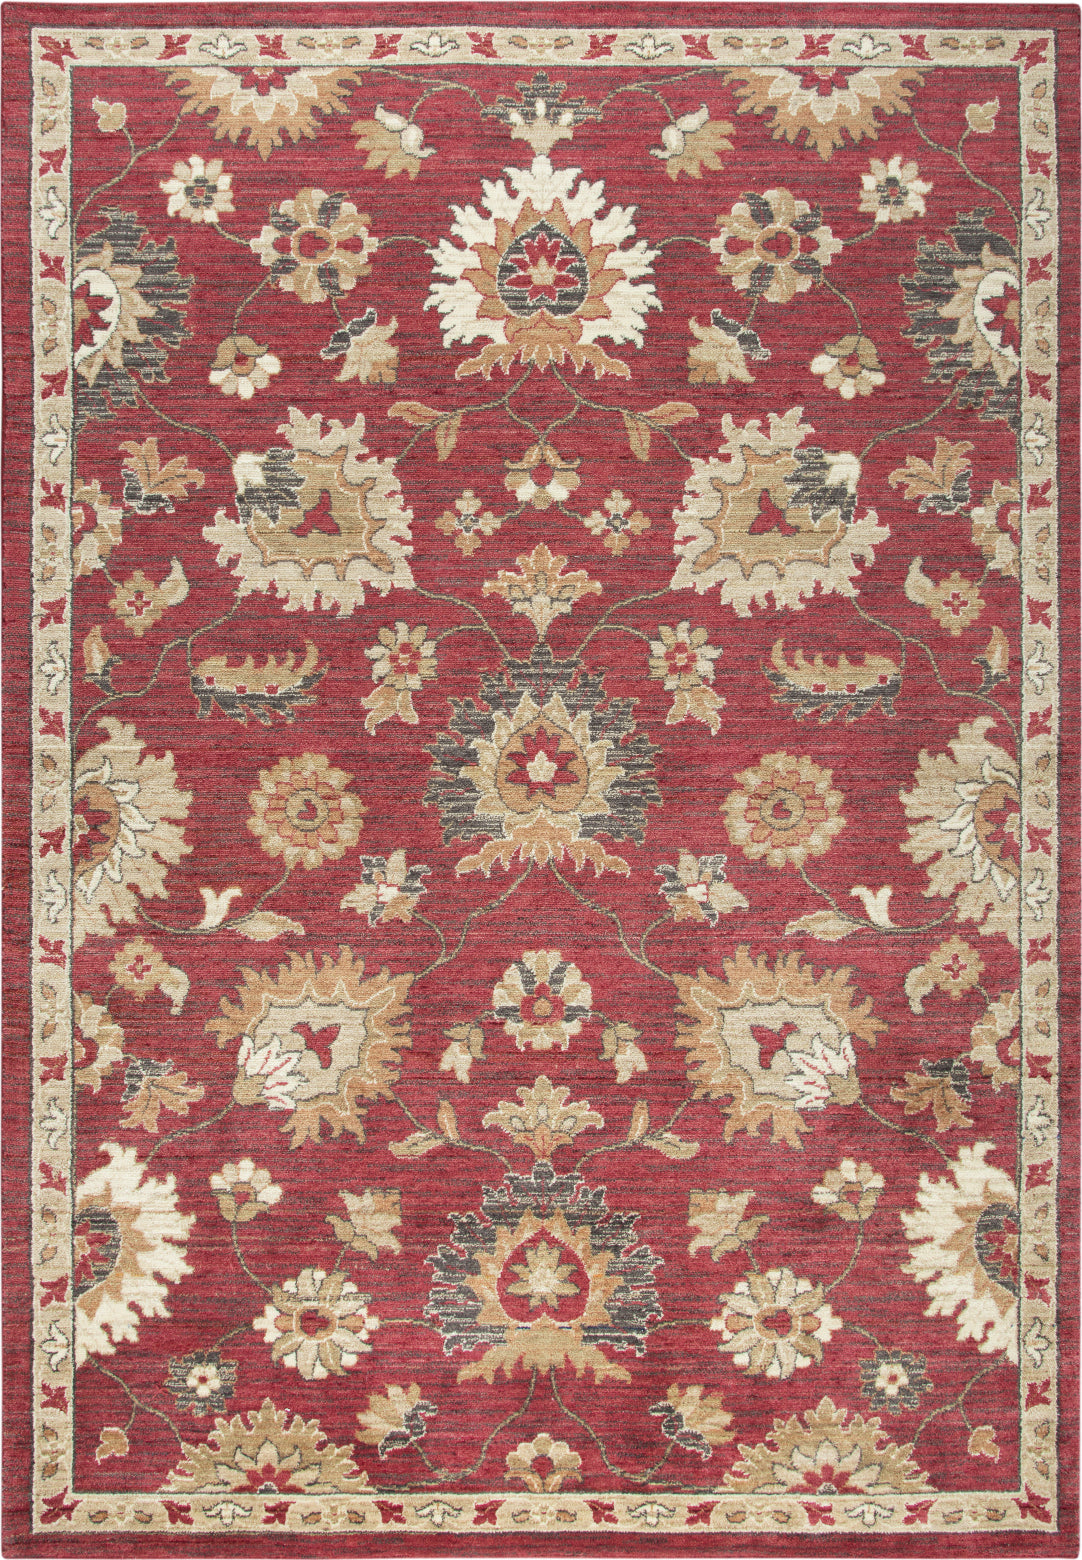 Rizzy Gossamer GS6851 Red Area Rug main image